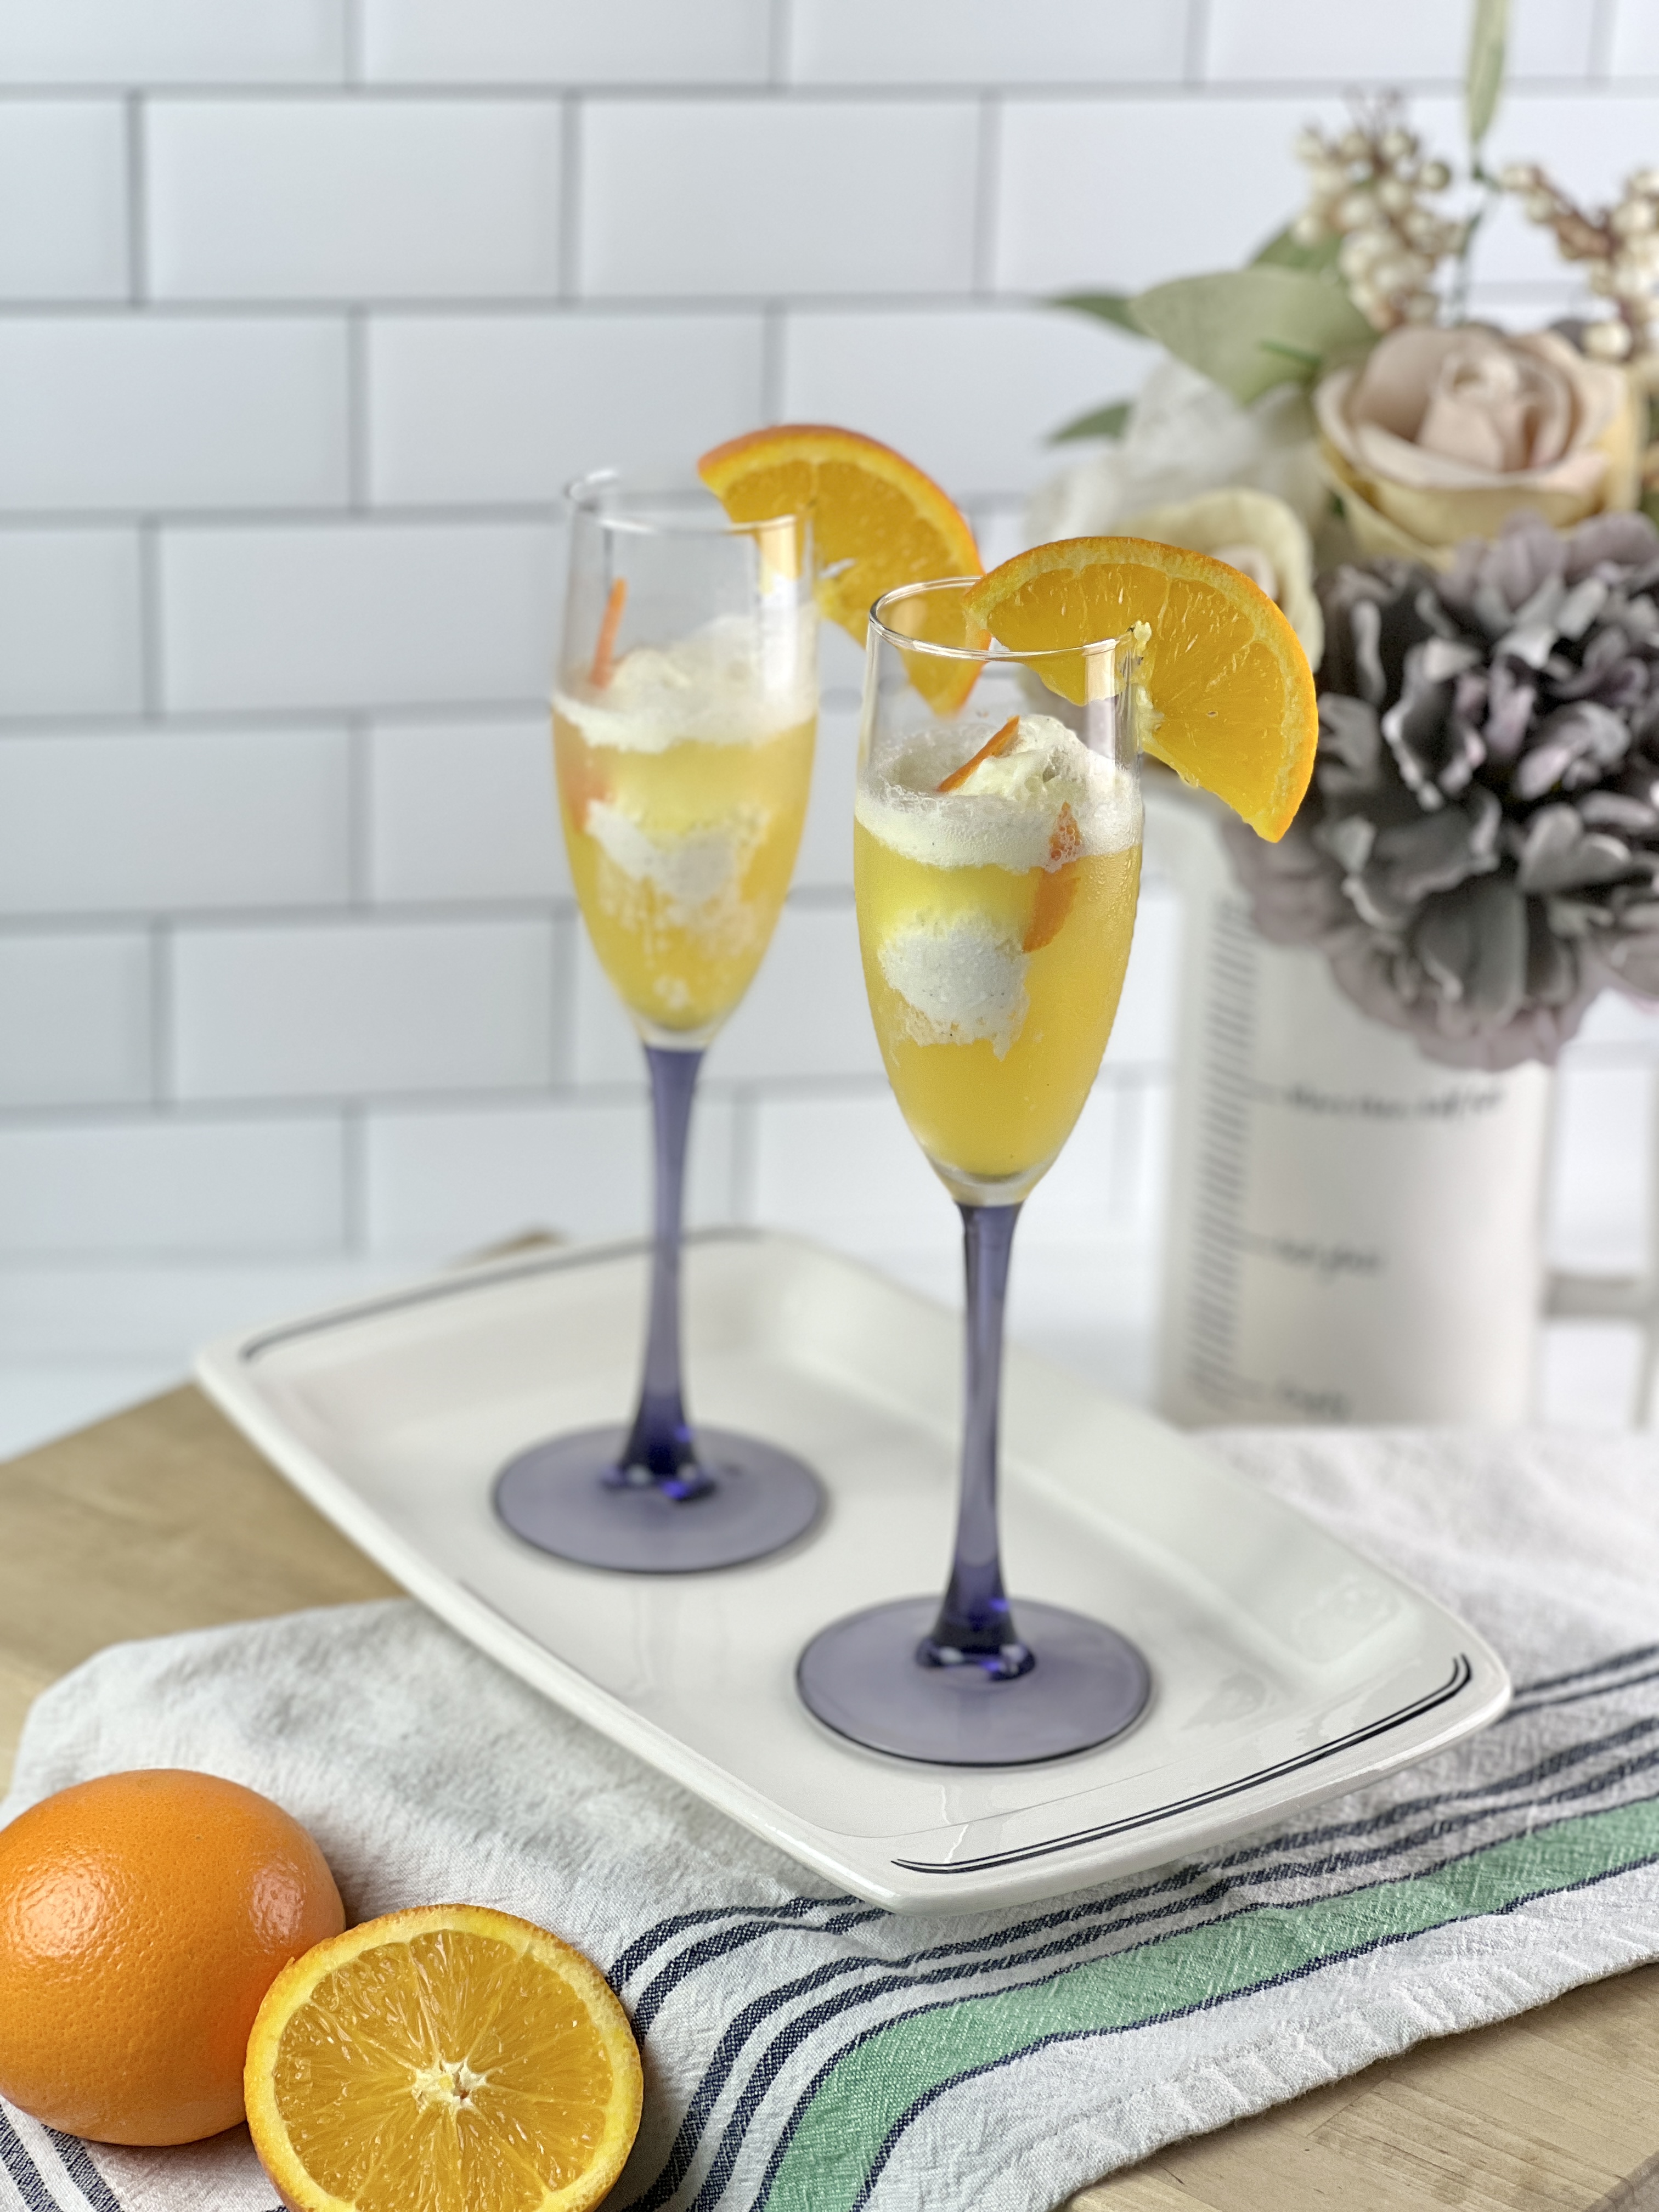 This mimosa float is the perfect fizzy brunch beverage or to spoil someone special with breakfast in bed.